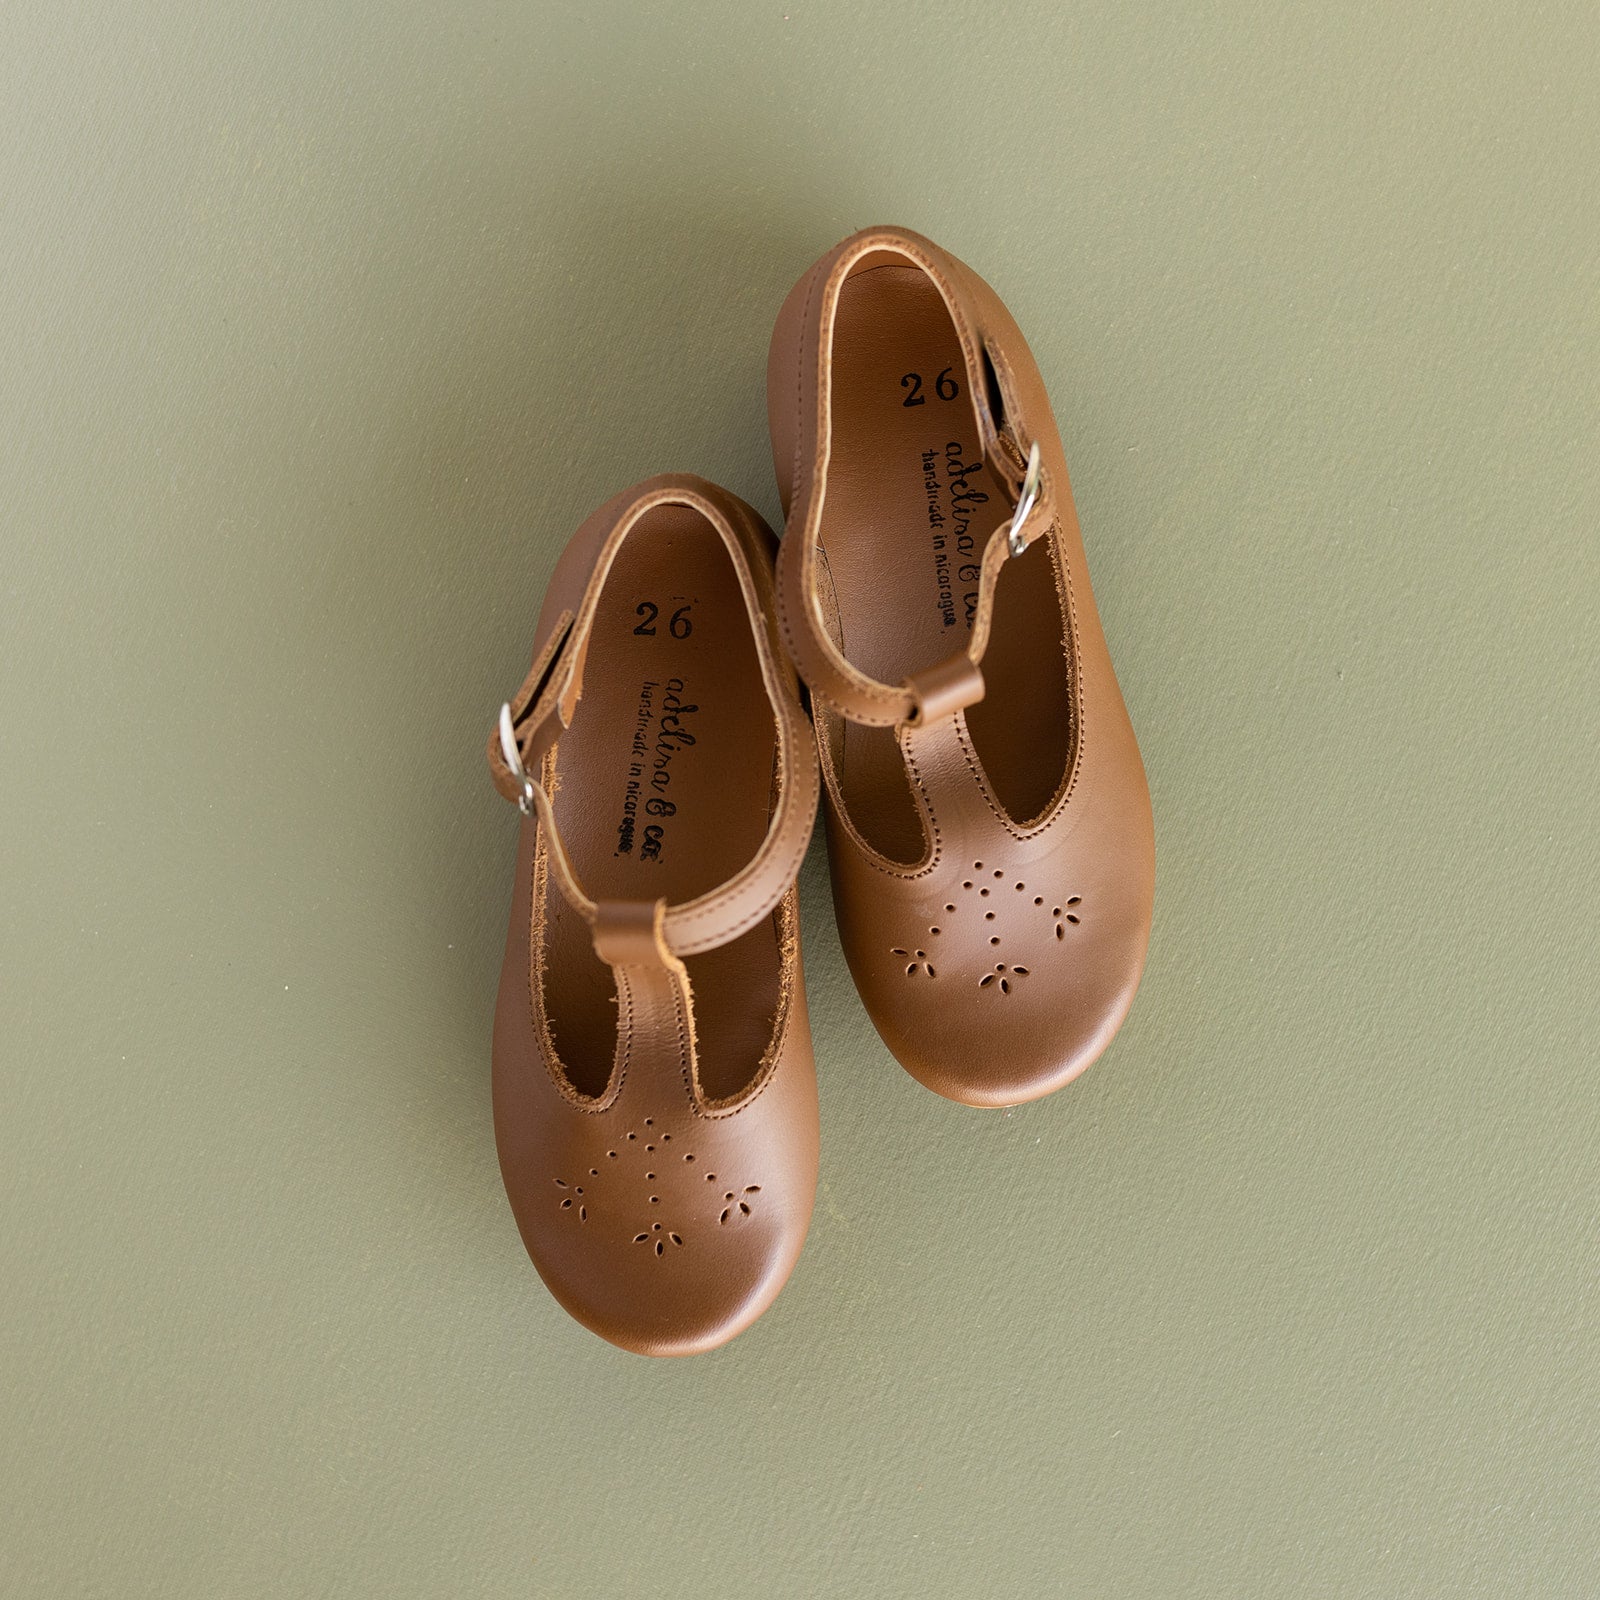 Adelisa &amp; Co t-bar Mary Janes with delicate floral detailing in medium brown leather. These leather Mary Jane shoes for girls are handmade and feature a buckle closure.